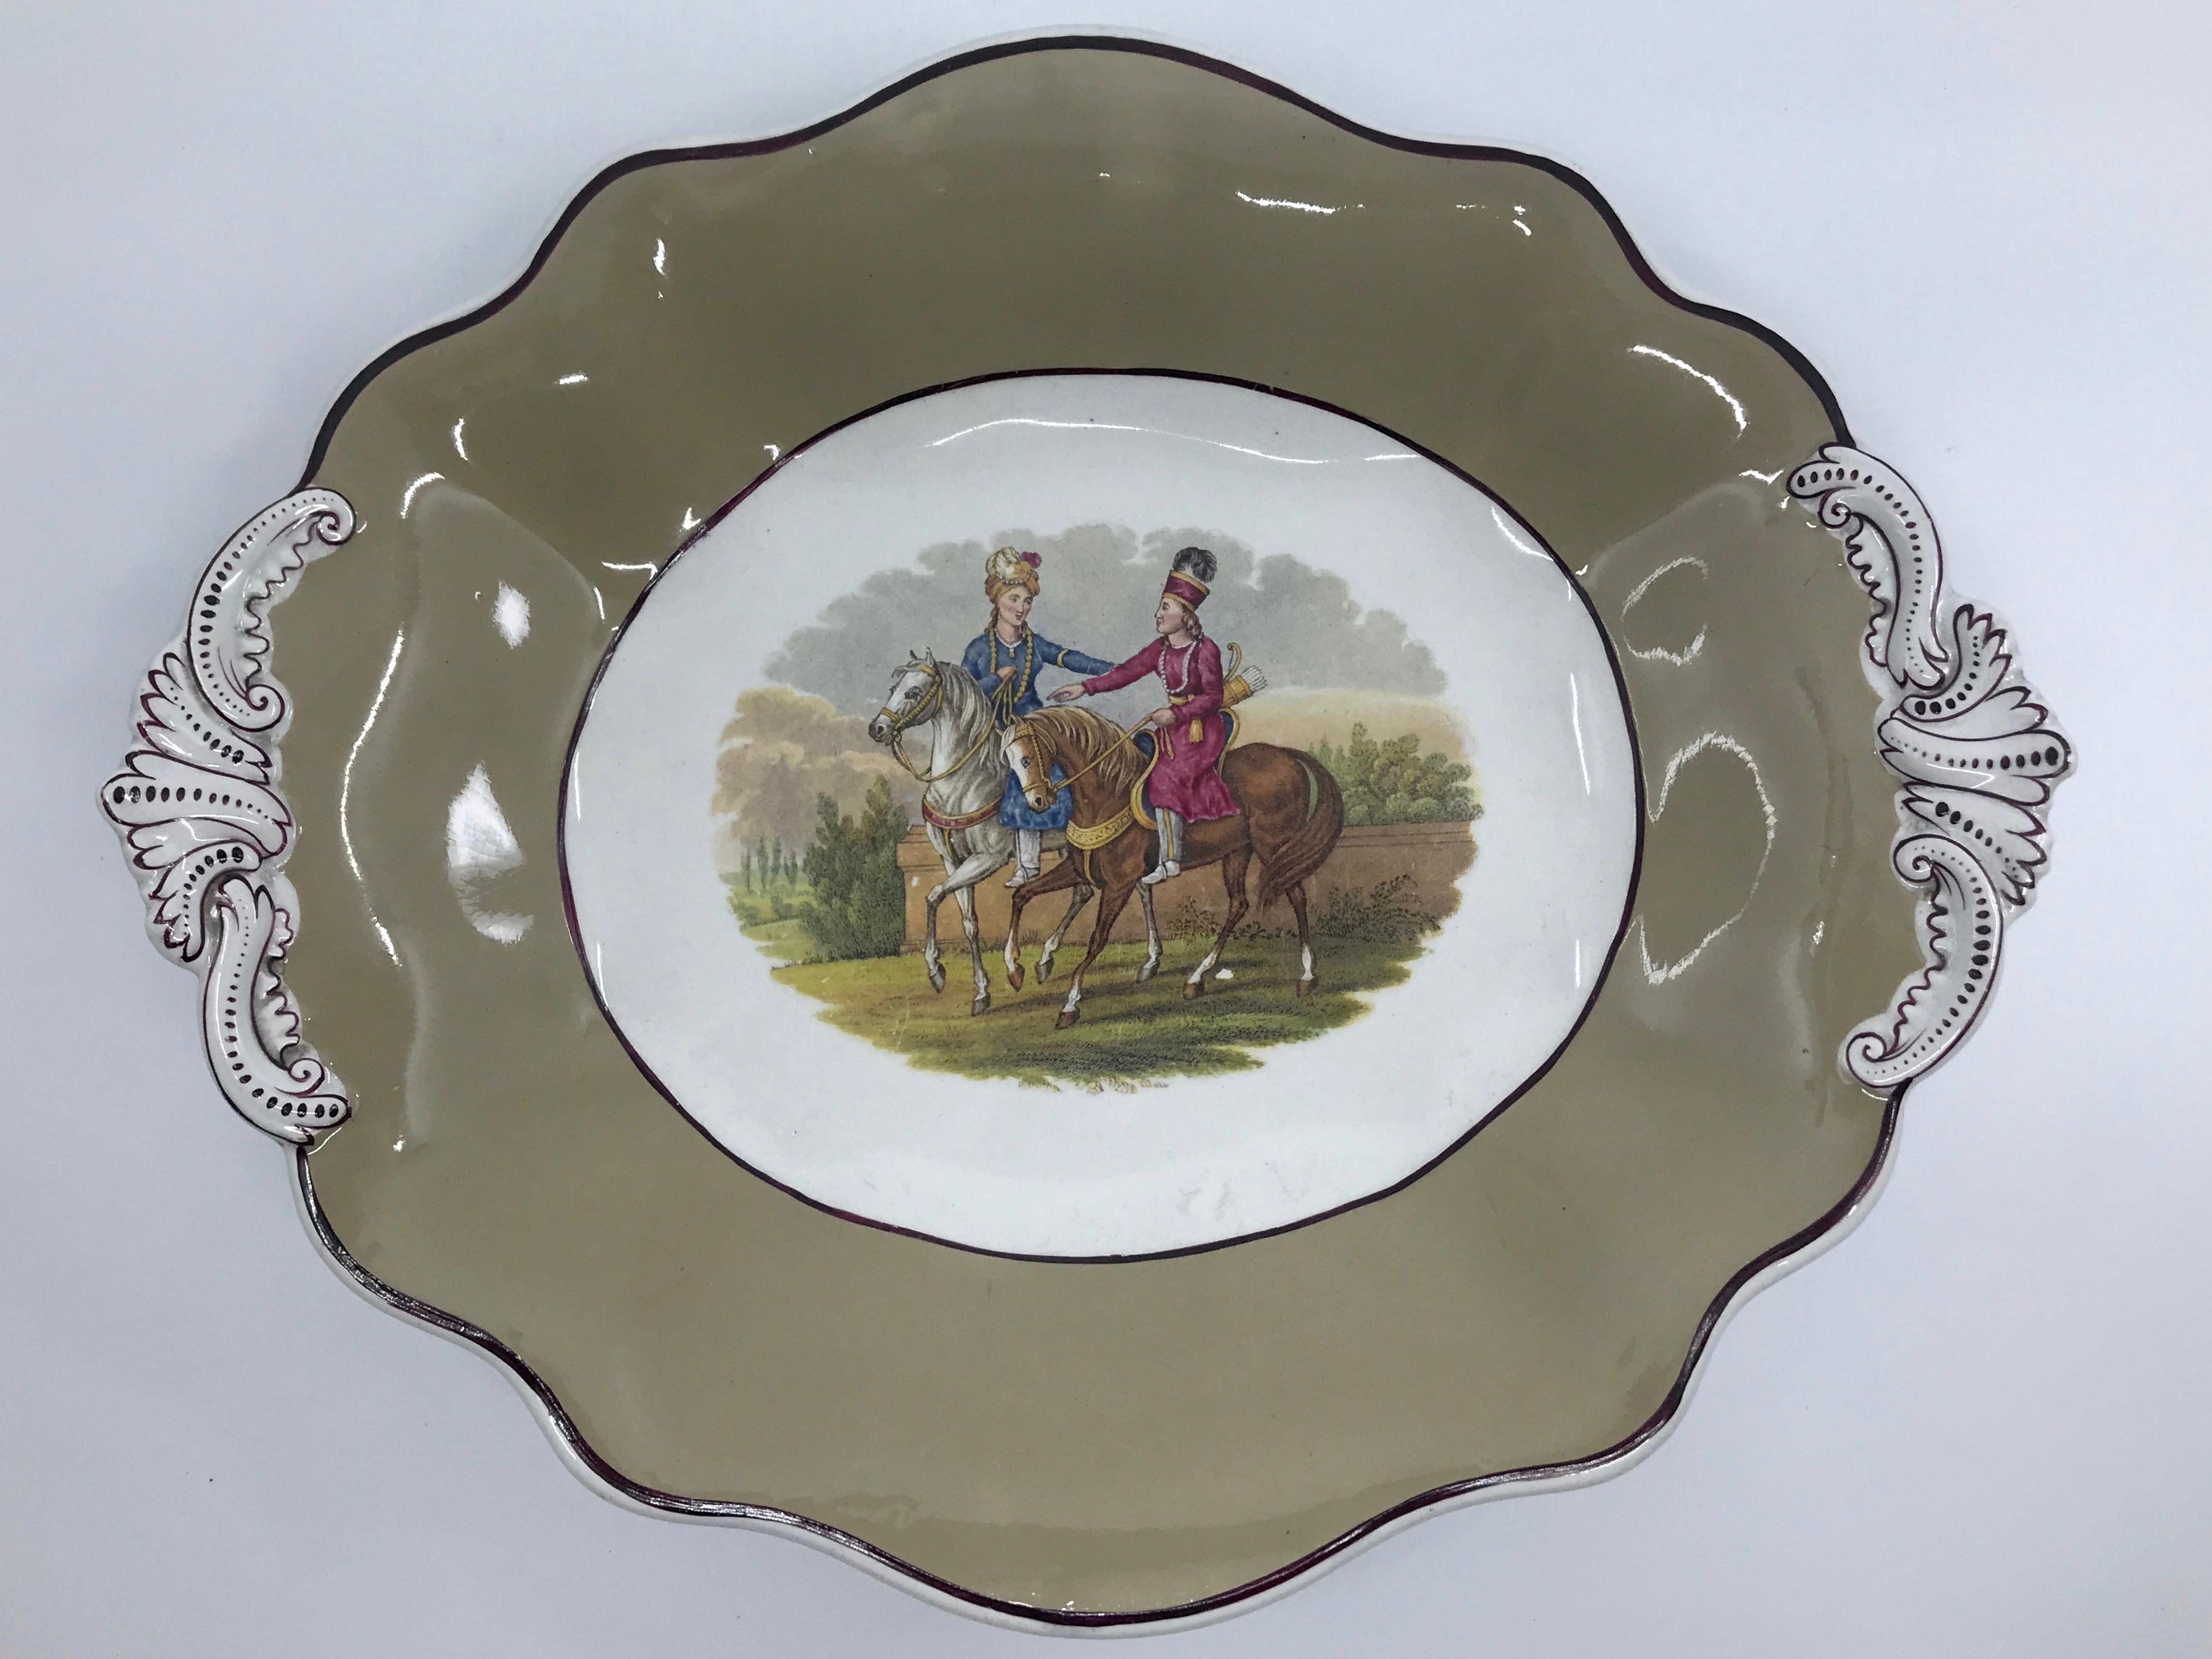 Pair English exotic equestrian serving dishes. Pair mocha and Bordeaux banded and shaped serving dishes/trays centering two equestrian groupings; one with mounted ottomans in fancy dress on two horses in front of a walled landscape, the other